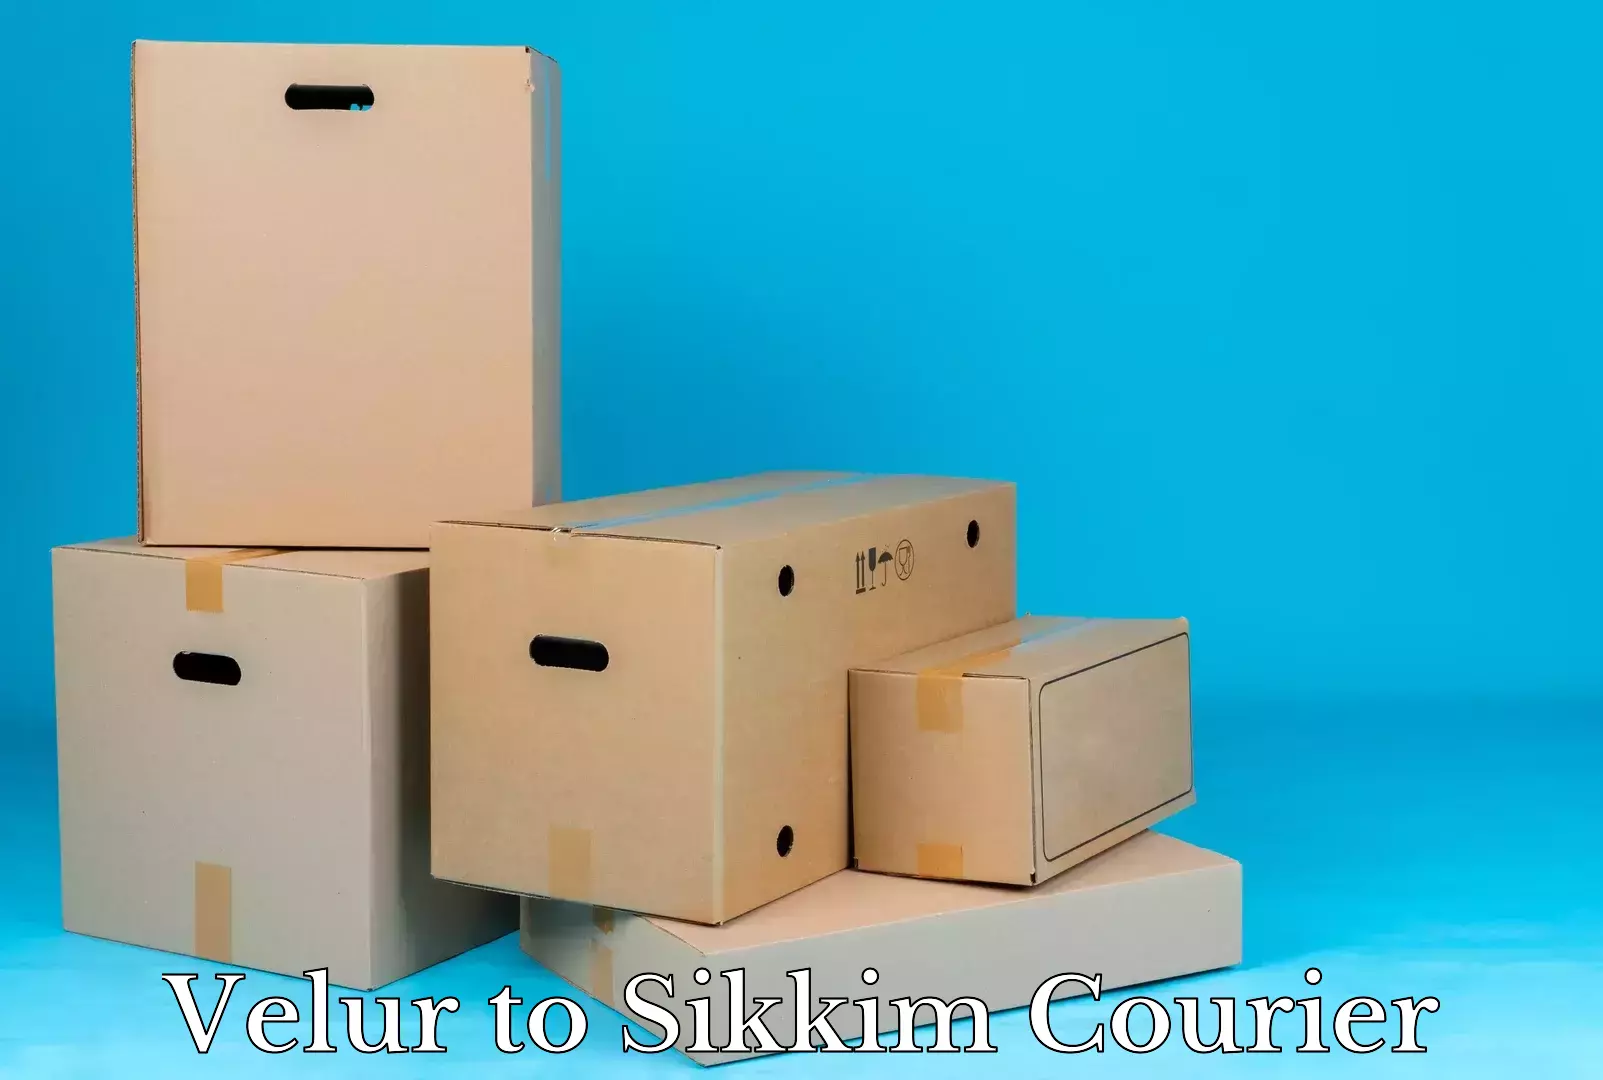 Furniture delivery service Velur to Pelling